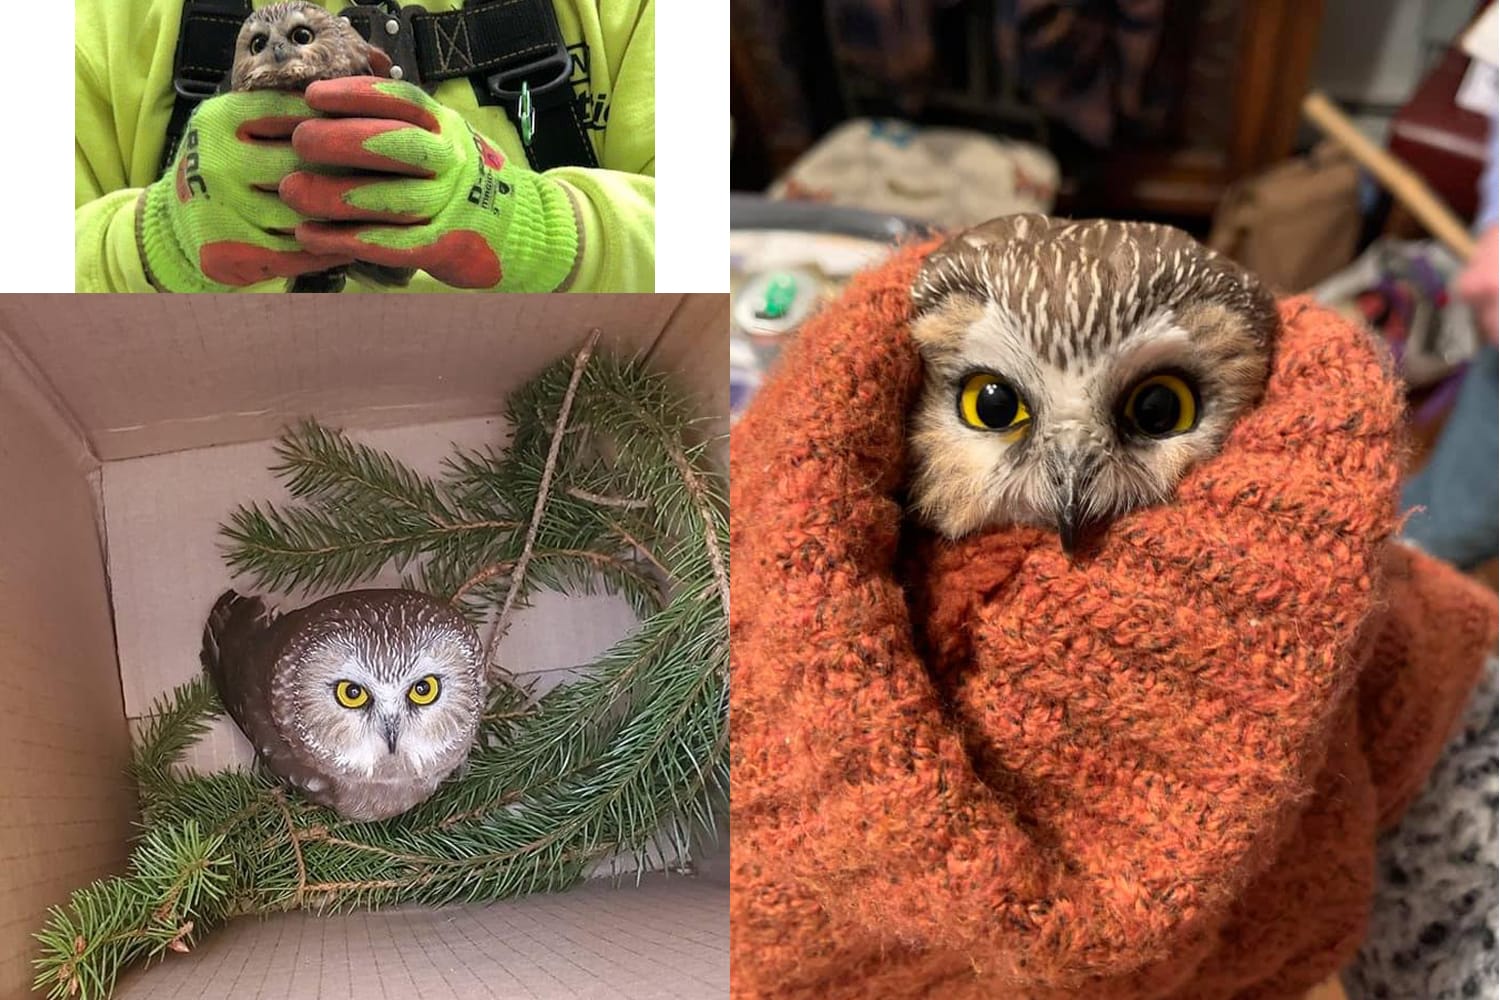 Owl rescued during setup of Rockefeller Center Christmas tree - BirdWatching